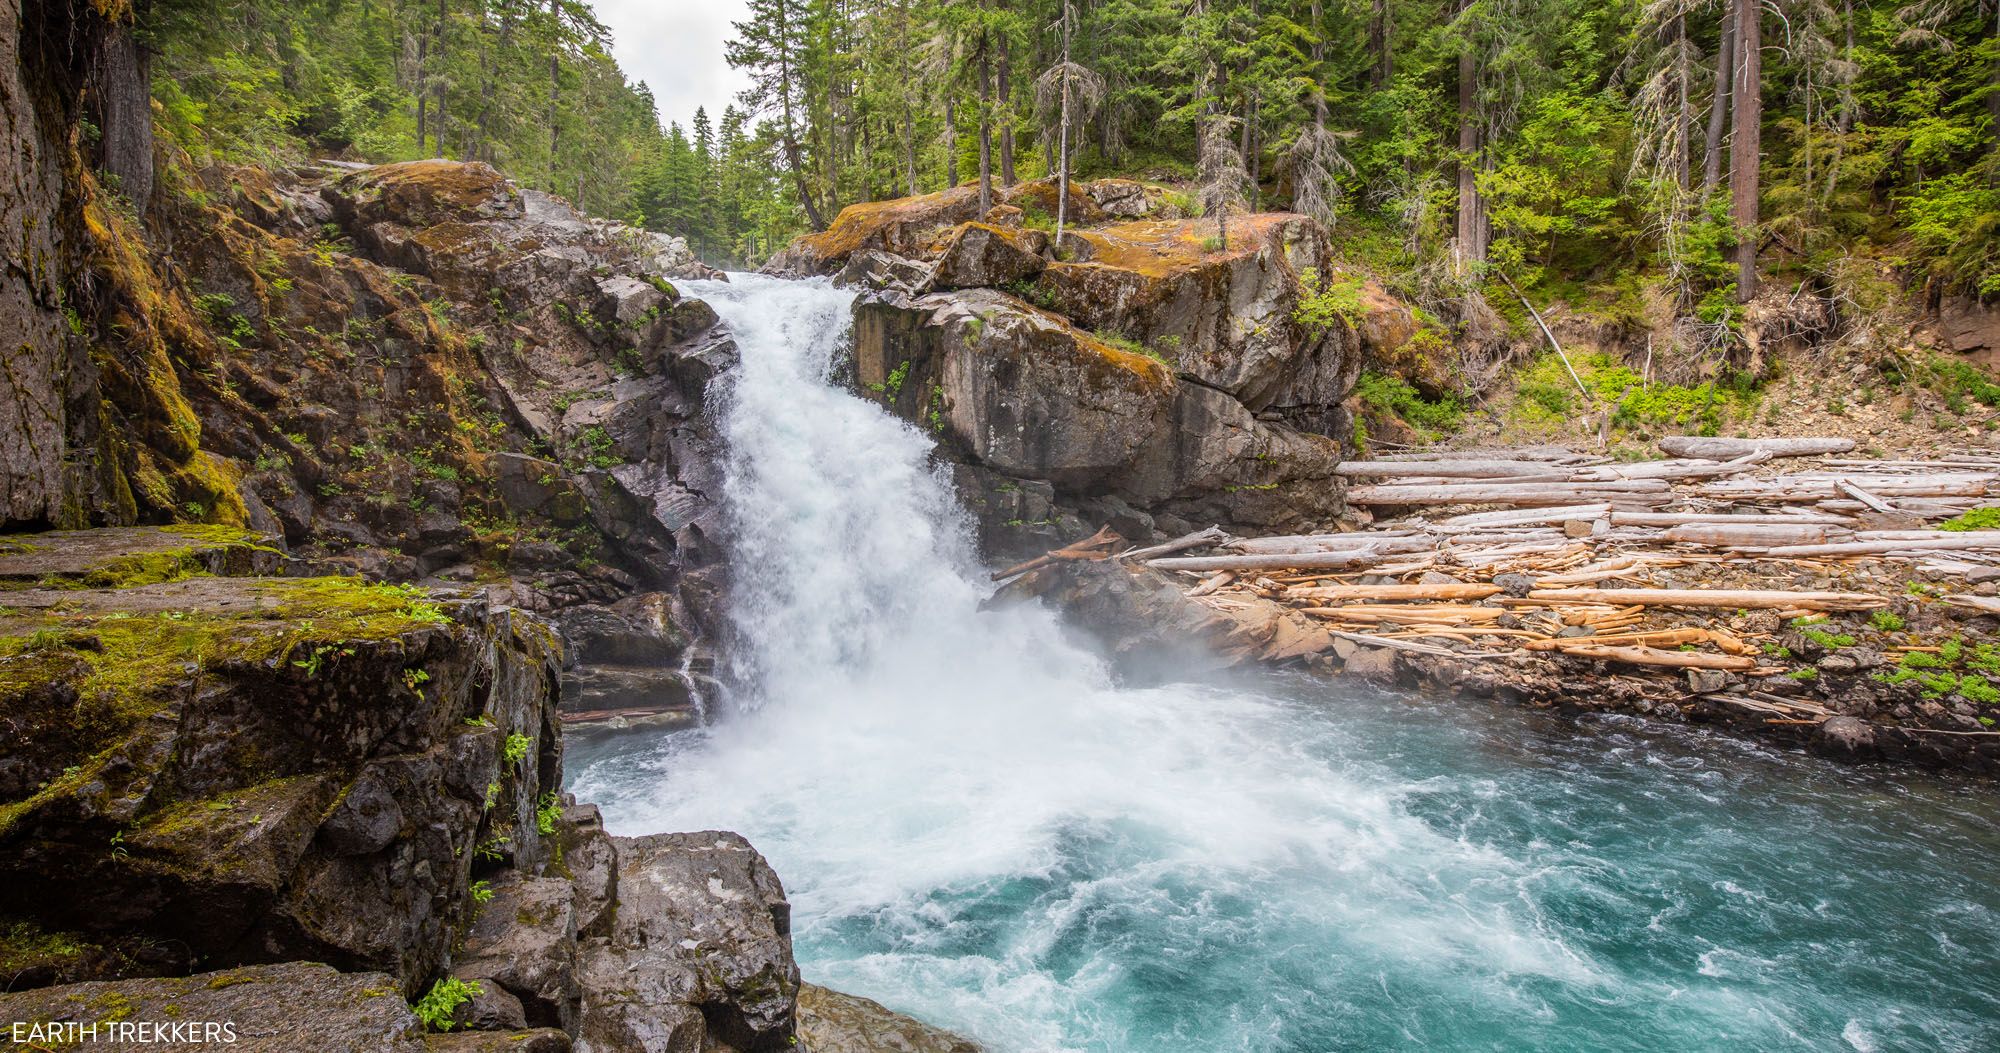 Featured image for “How to Hike the Silver Falls Loop Trail, Mount Rainier National Park”